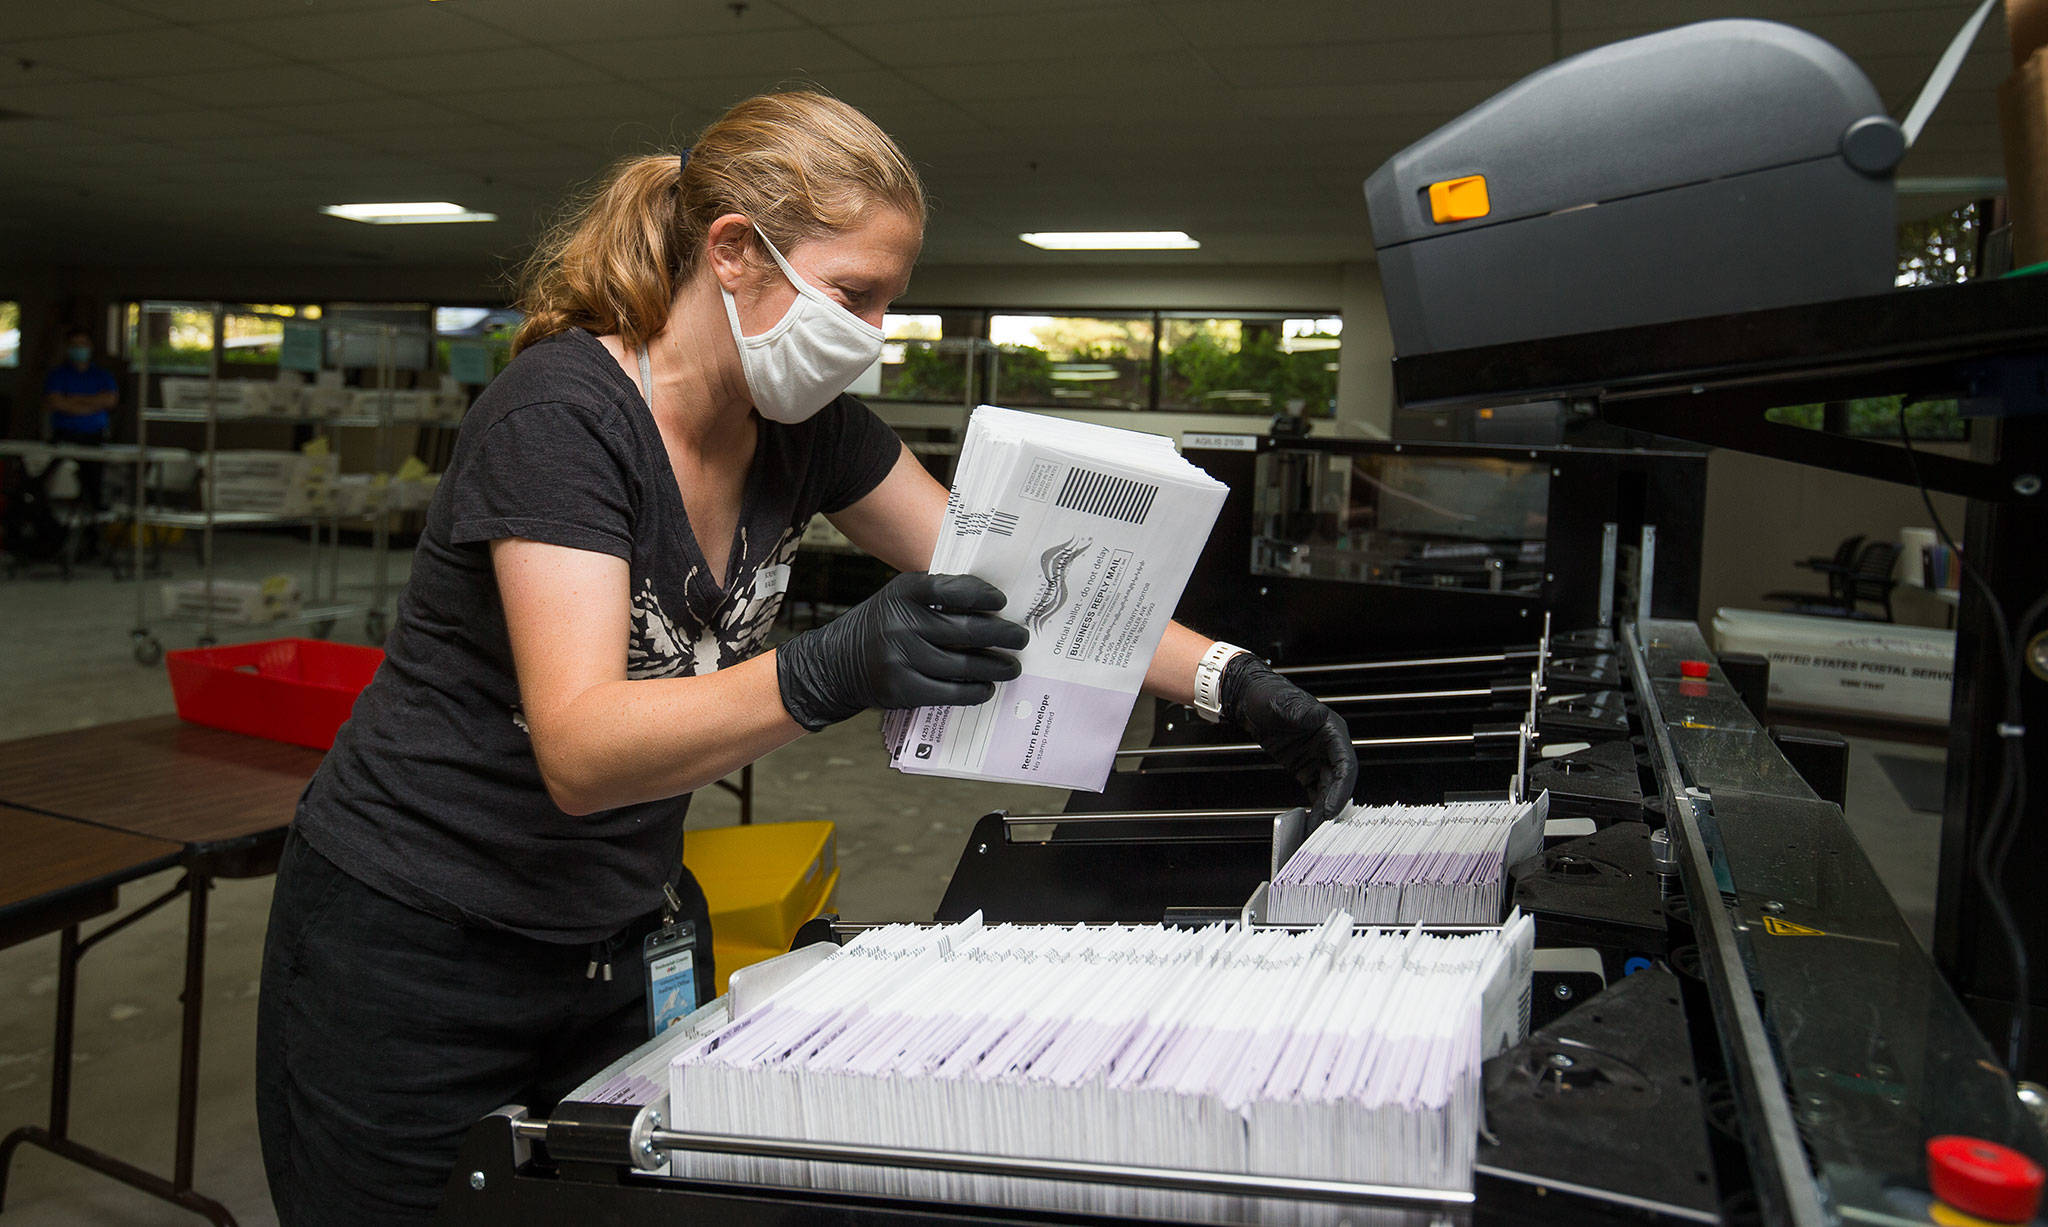 Catherine Berwicks loads ballots into a tray after scanning them at the Snohomish County Elections Ballot Processing Center on Tuesday in Everett. (Andy Bronson / The Herald)